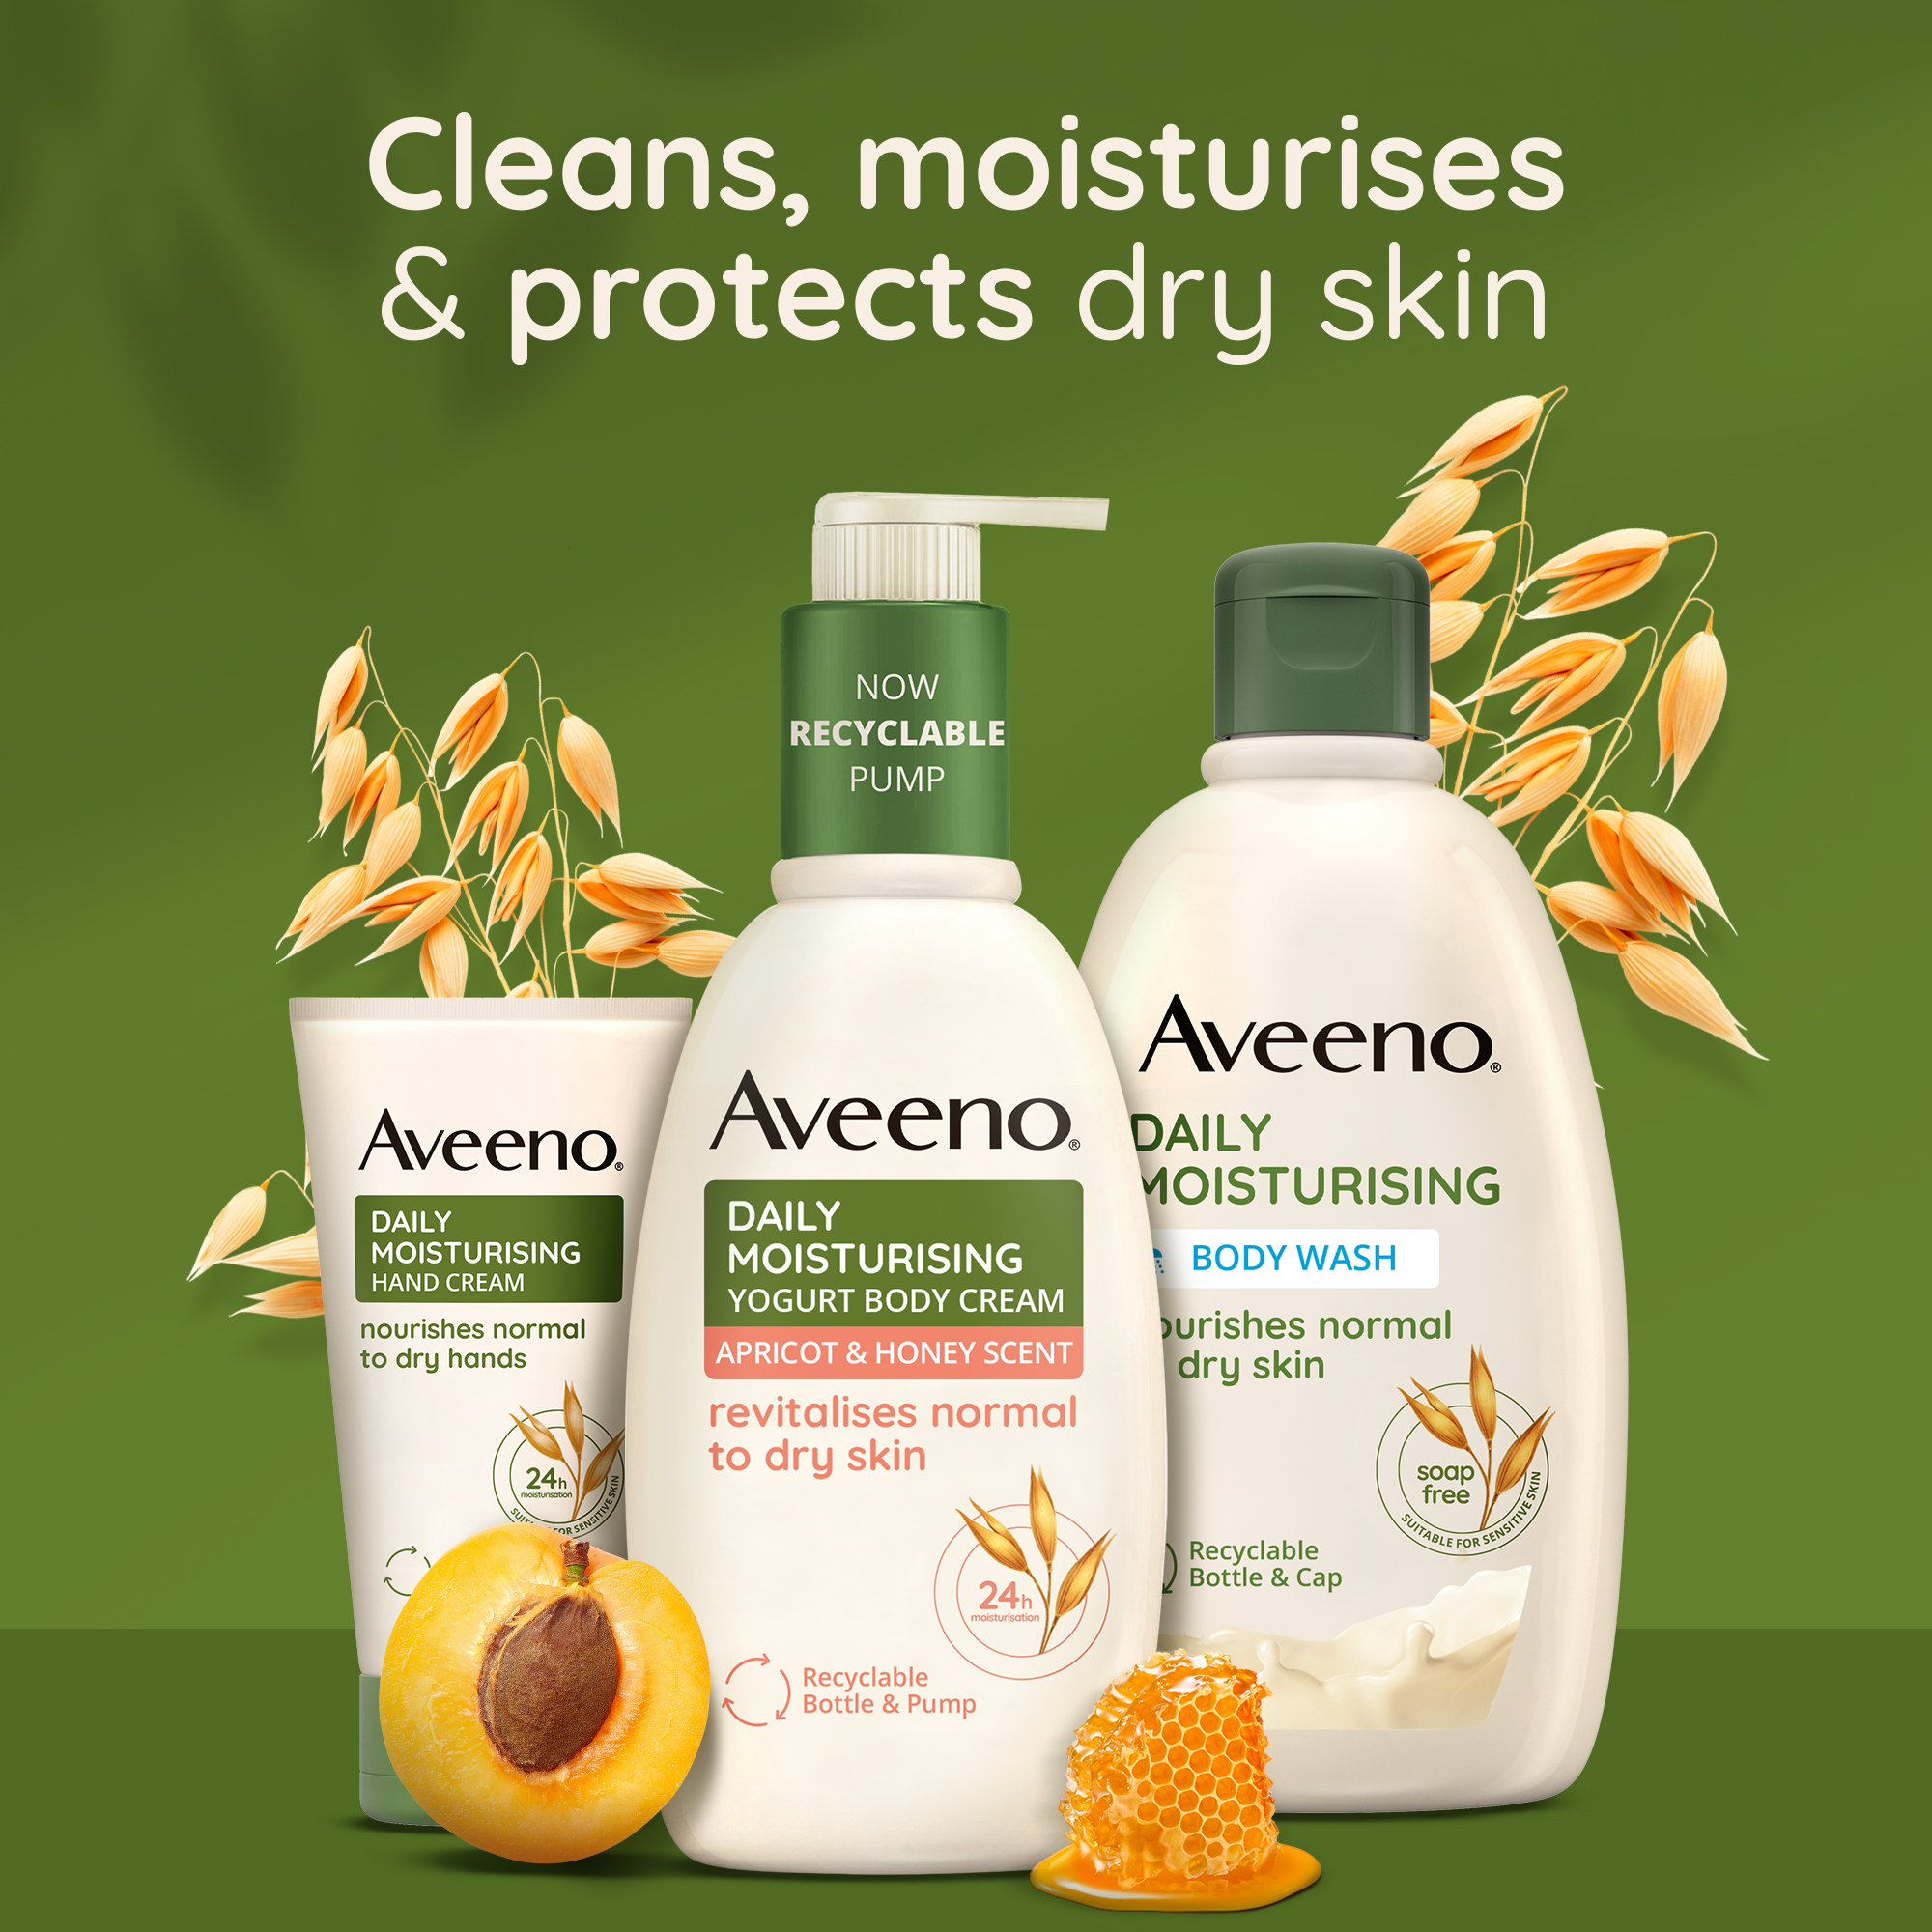 cleanse, moisturises and protects dry skin